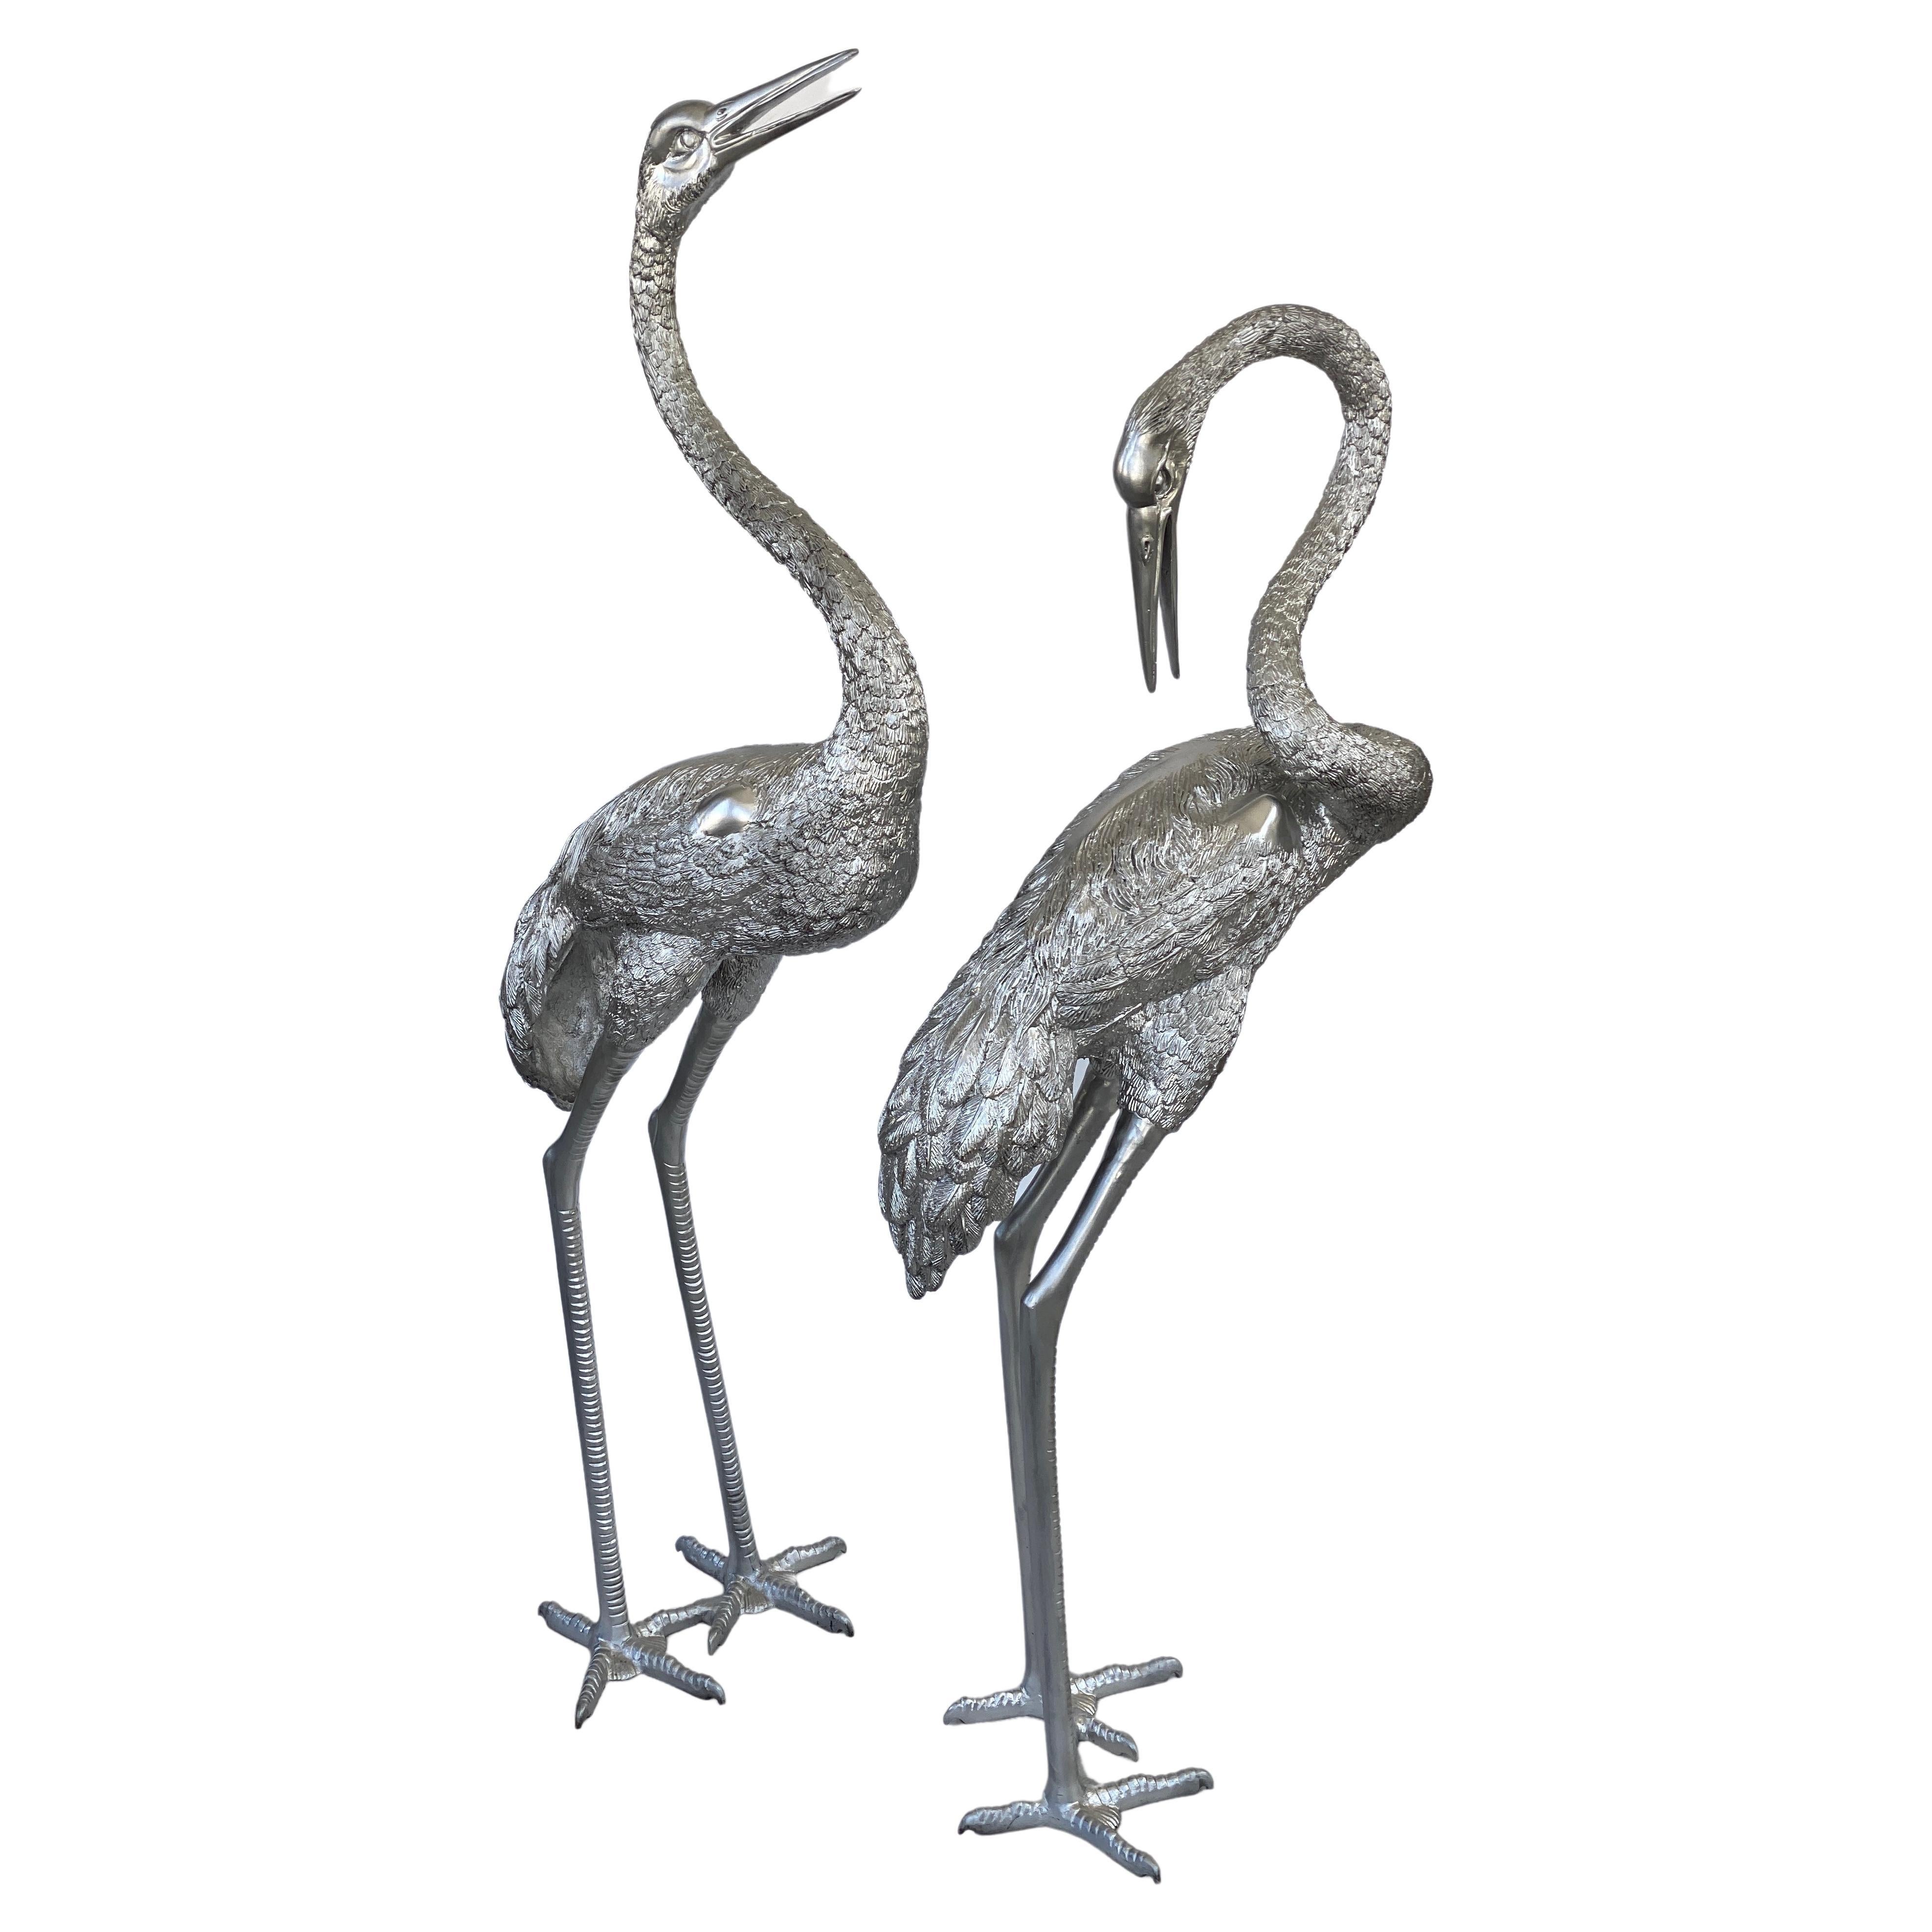 This stylish set of two cranes would feel very much at home in a Beverly Hills garden setting of Tony Duquette, or perhaps Doris Dukes 